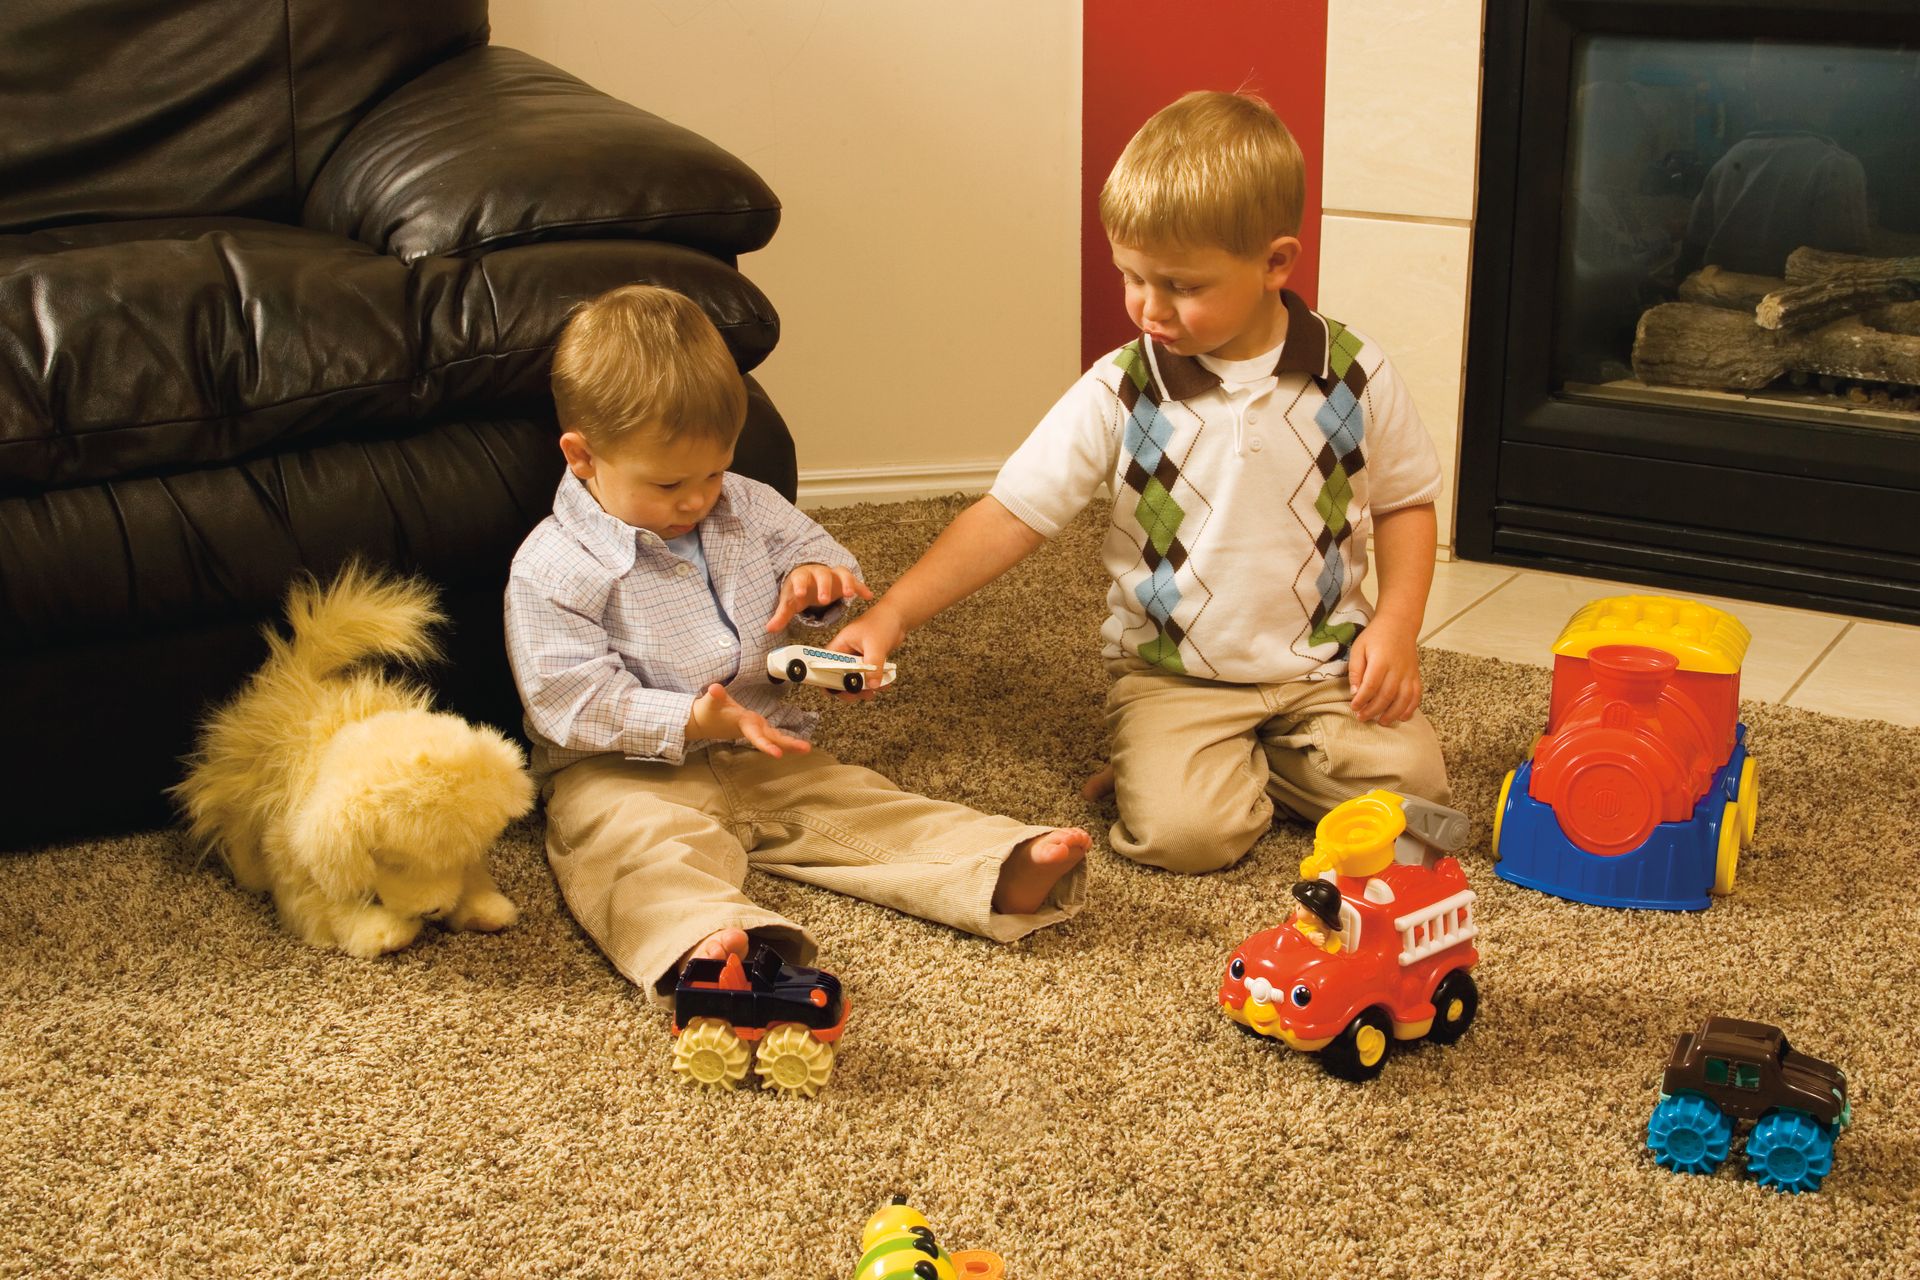 Two young brothers play with cars on the floor together.